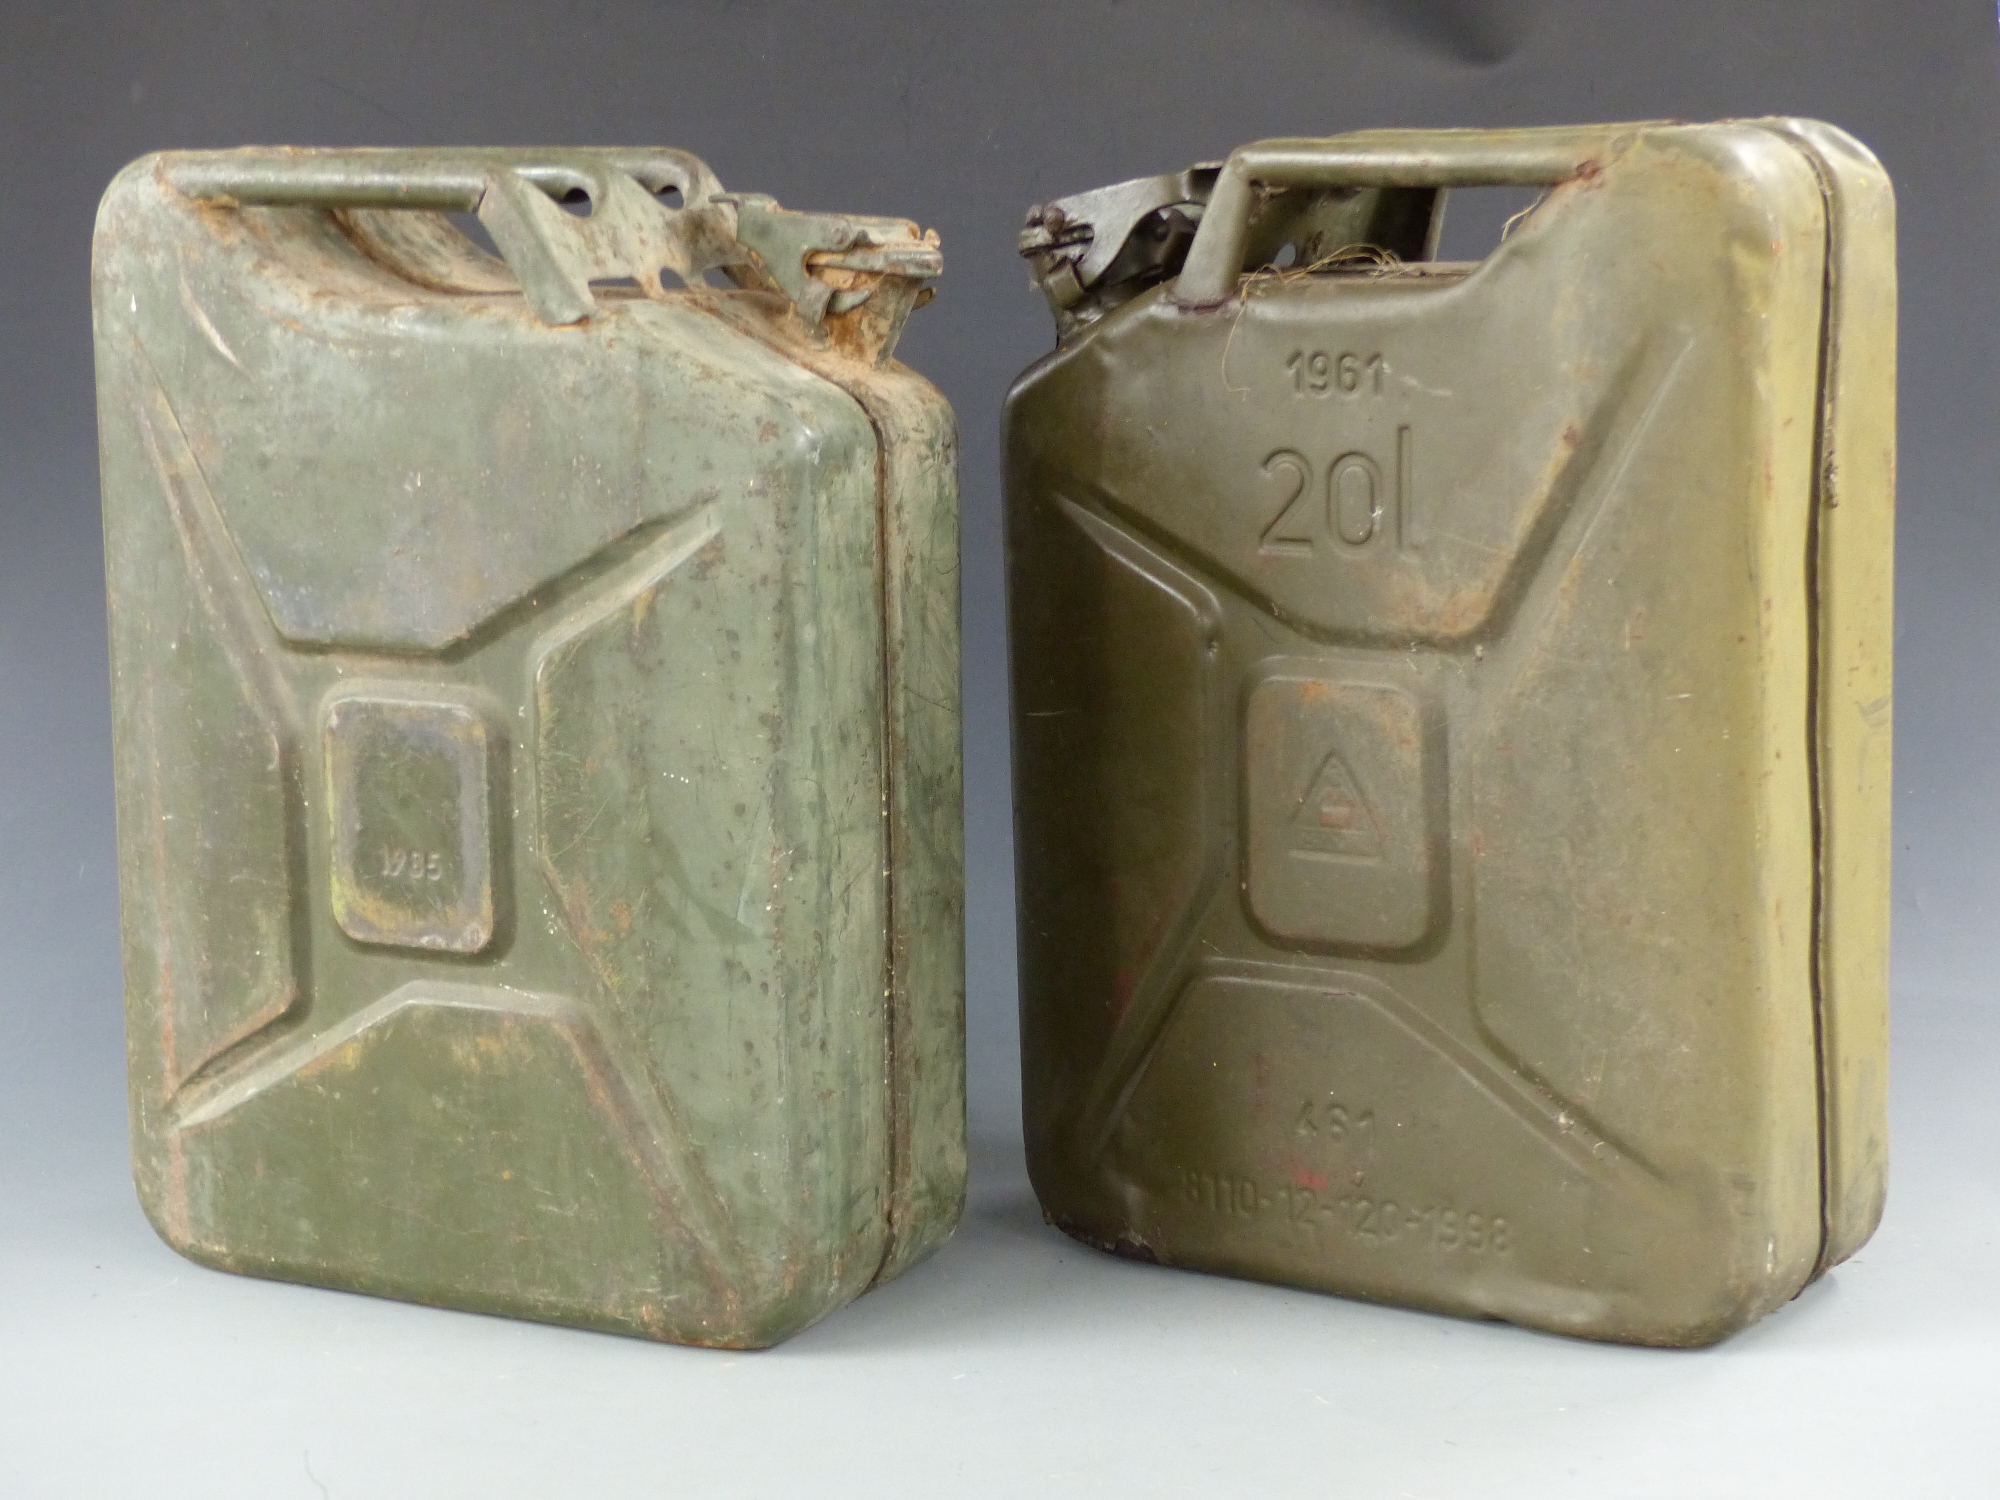 Two Jerry cans one dated 1961 the other 1985